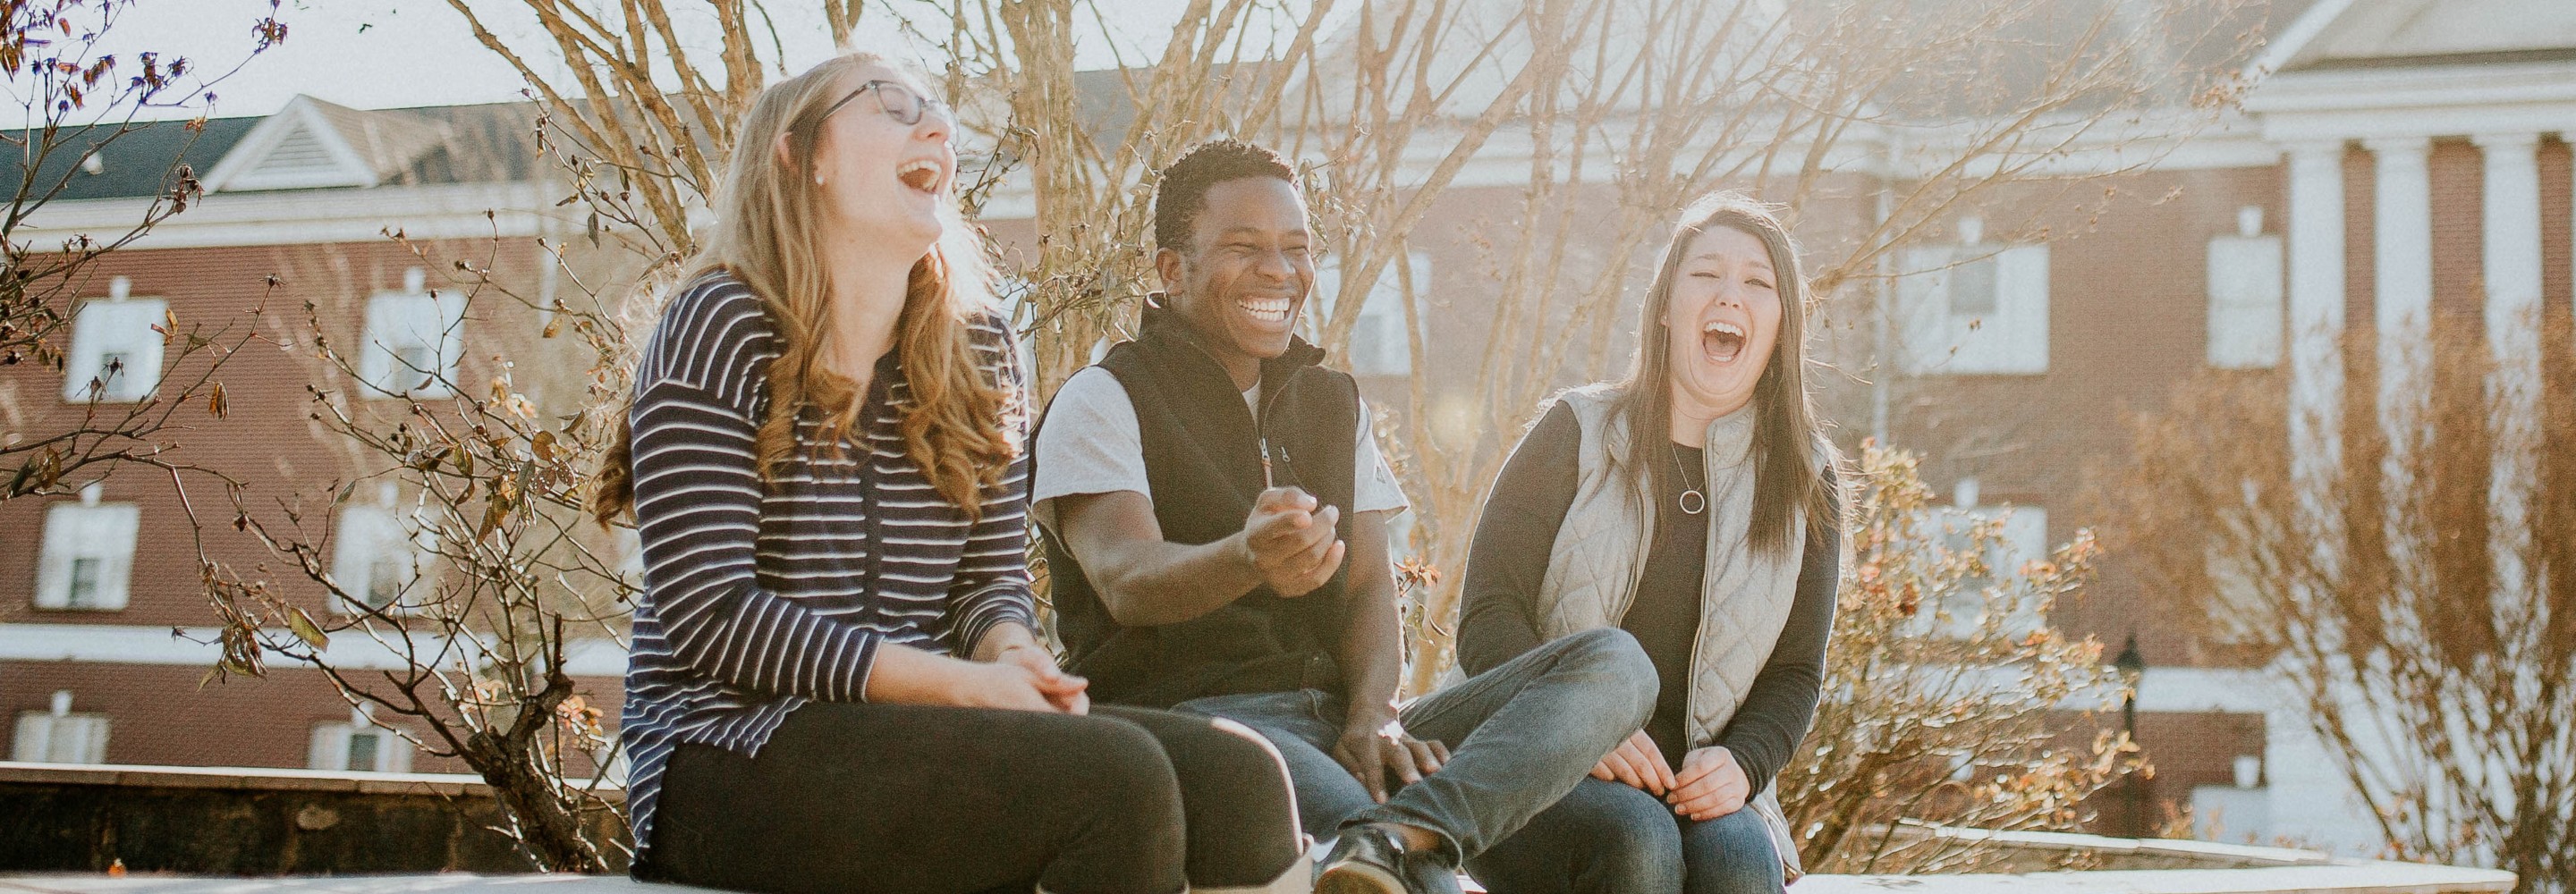 Students laugh together on the Tennessee campus